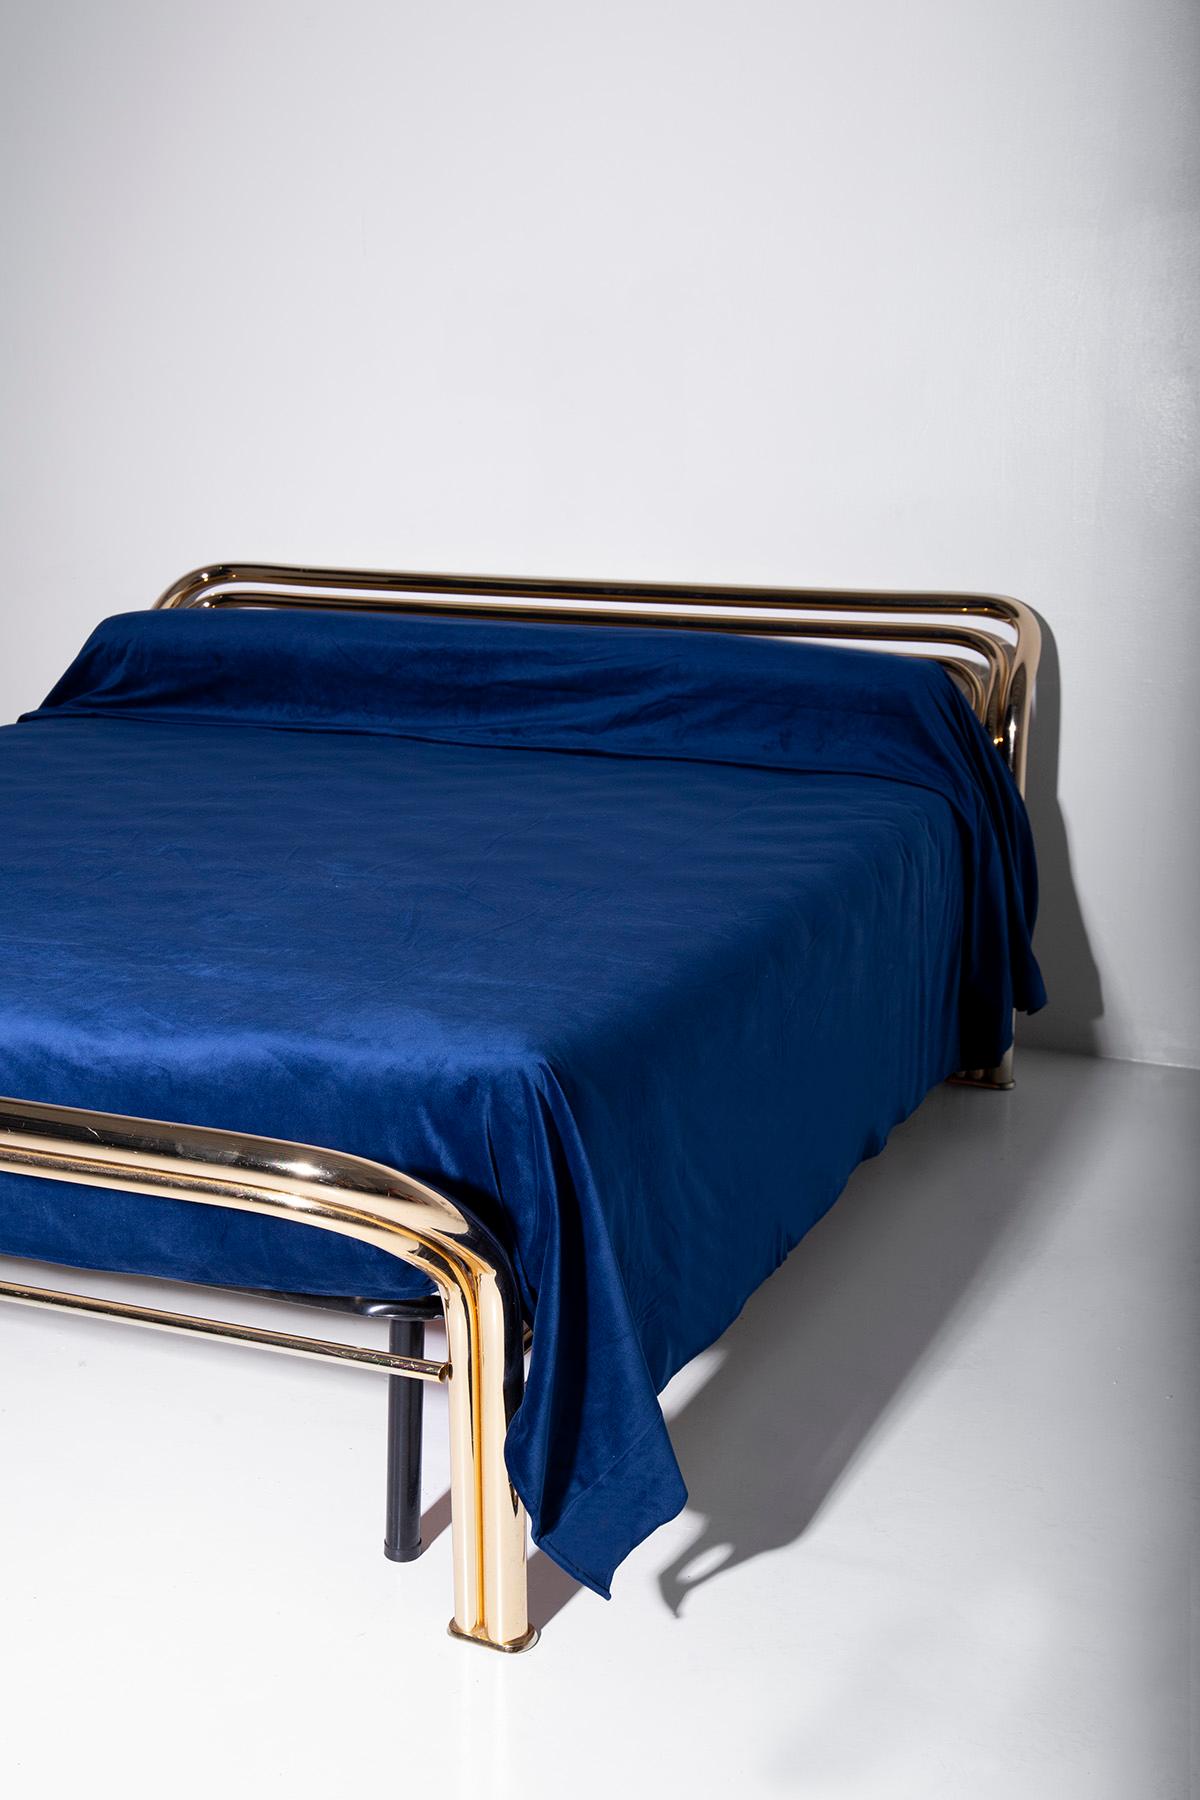 Luciano Frigerio italian vintage Brass bed, branded For Sale 1